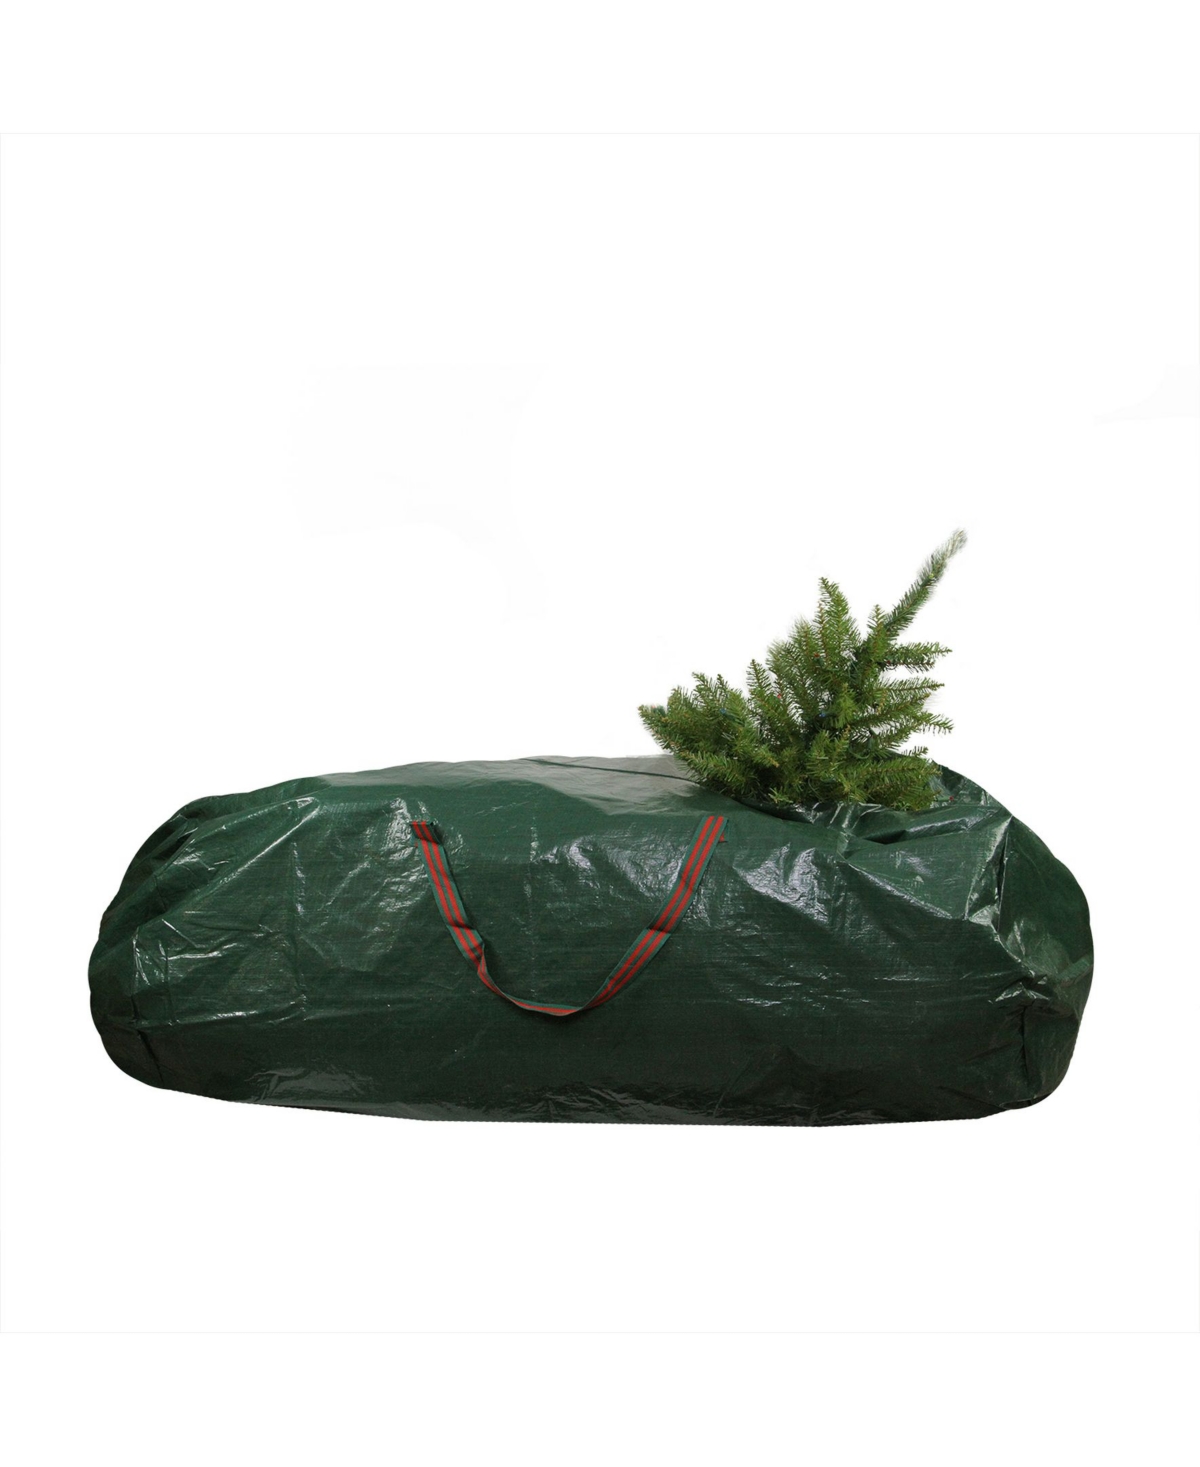 Artificial Christmas Tree Storage Bag - Fits Up To A 9' Tree - Green